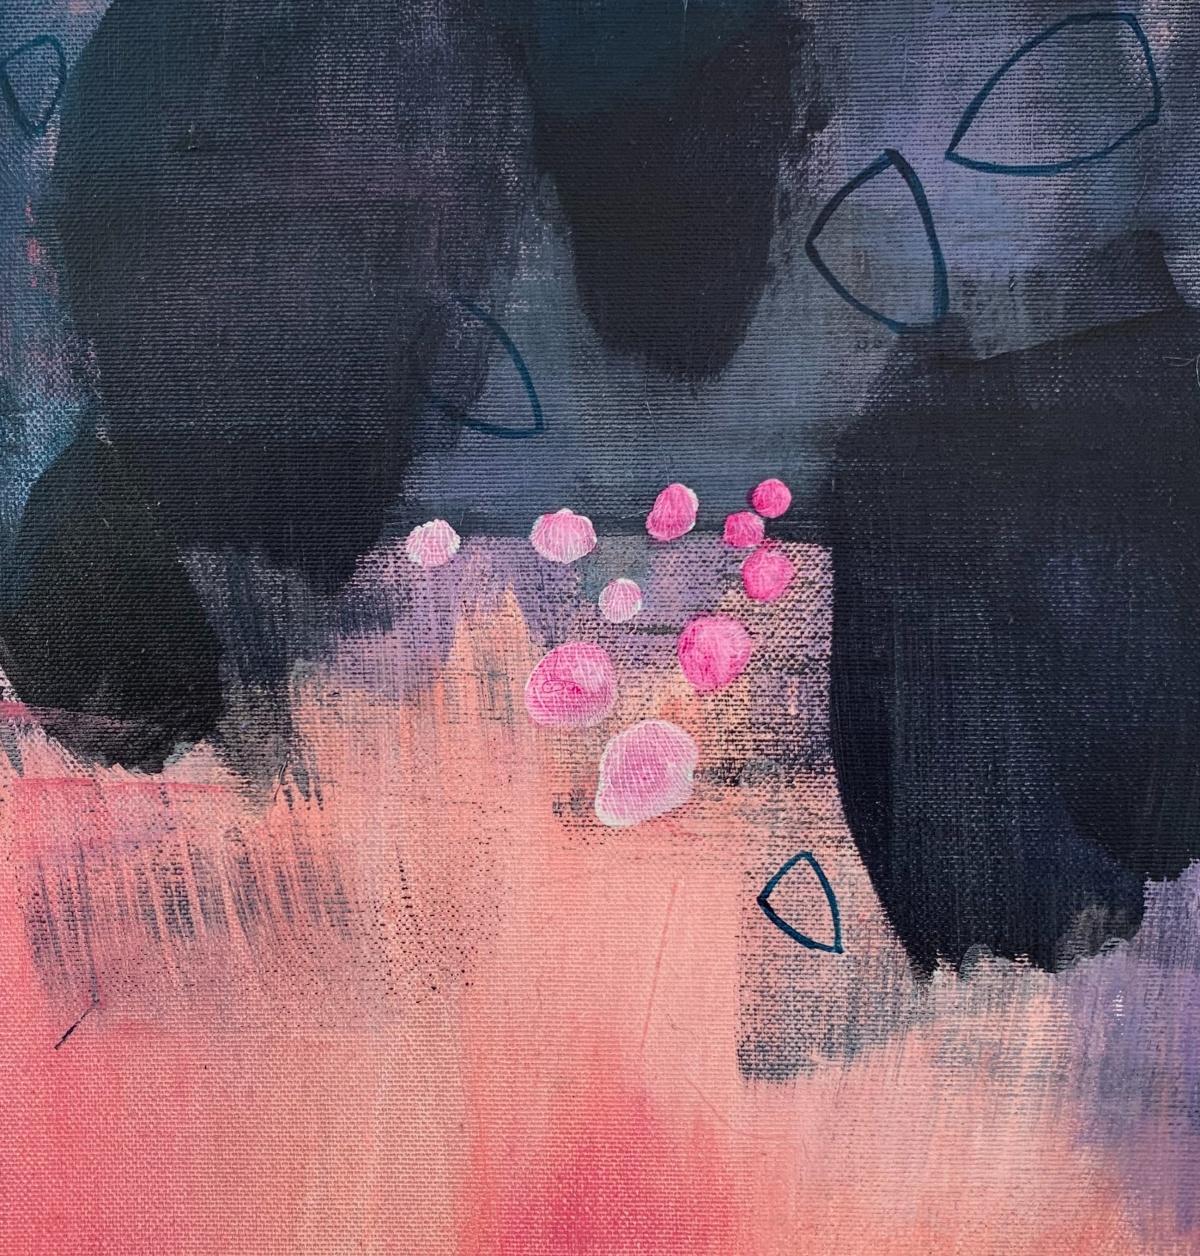 Pink river - 21 Century, Contemporary Abstract, Colorful, Vibrant - Black Abstract Painting by Anna Masiul-Gozdecka